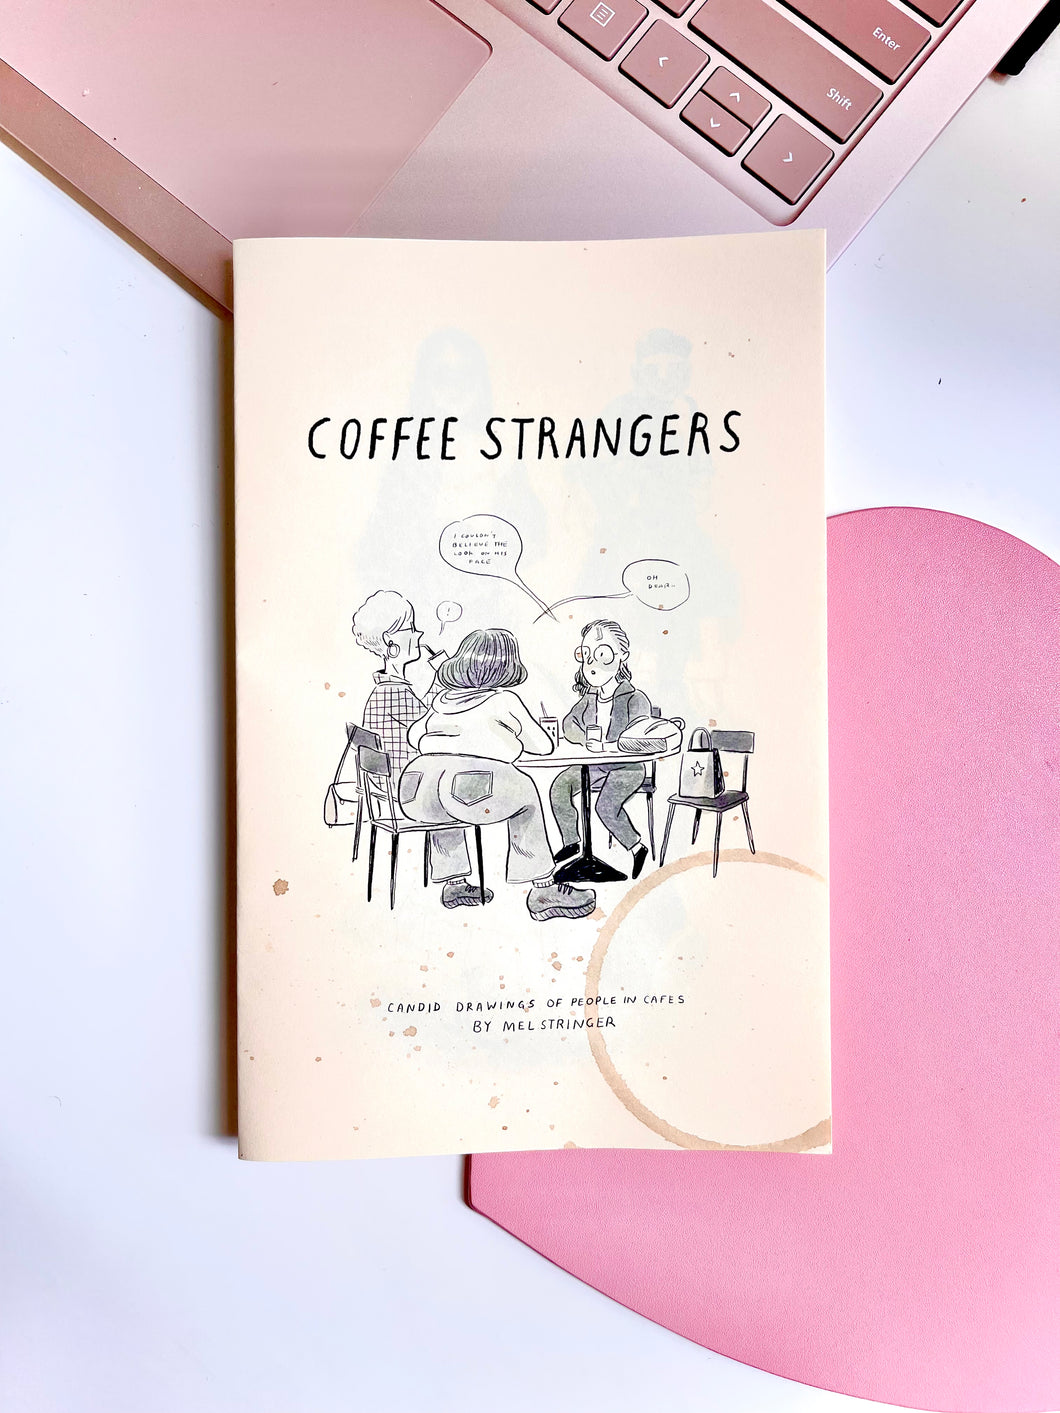 Coffee Strangers - booklet with unique coffee stain - 16 pages